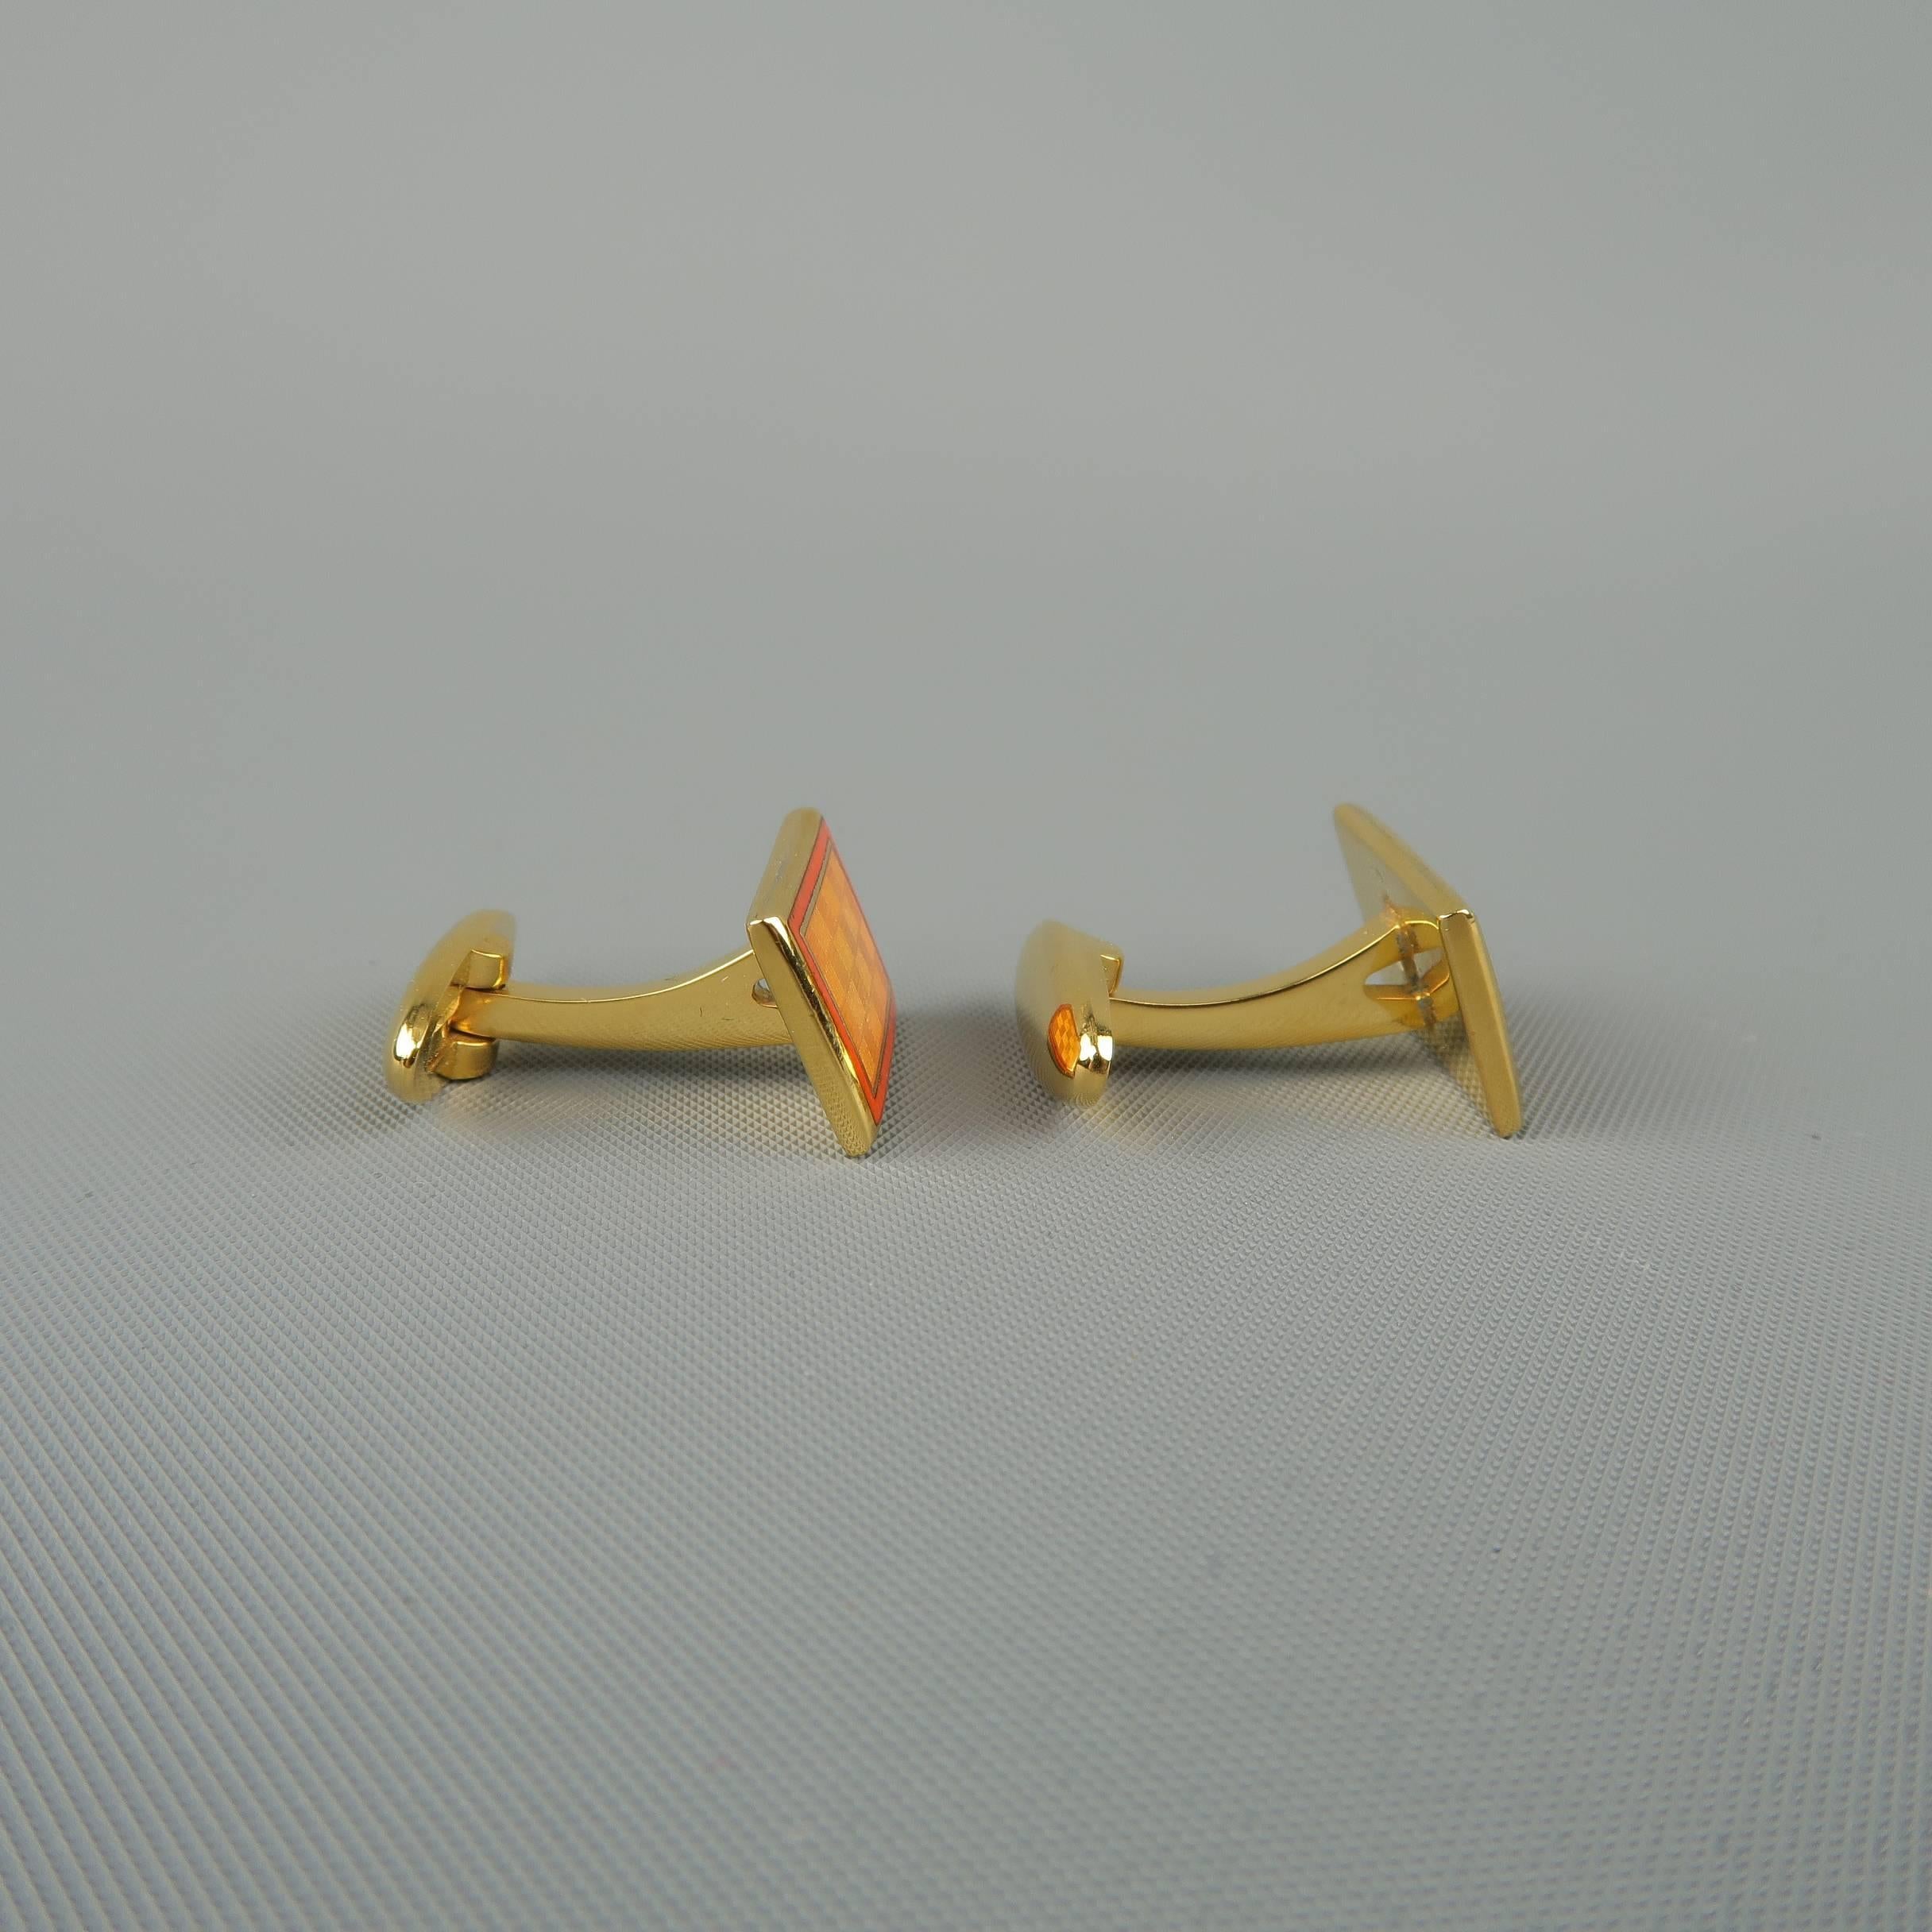 Vintage FACONNABLE cuff links come in yellow gold tone metal with orange enamel checkered motif. With case.
 
Good Pre-Owned Condition.
